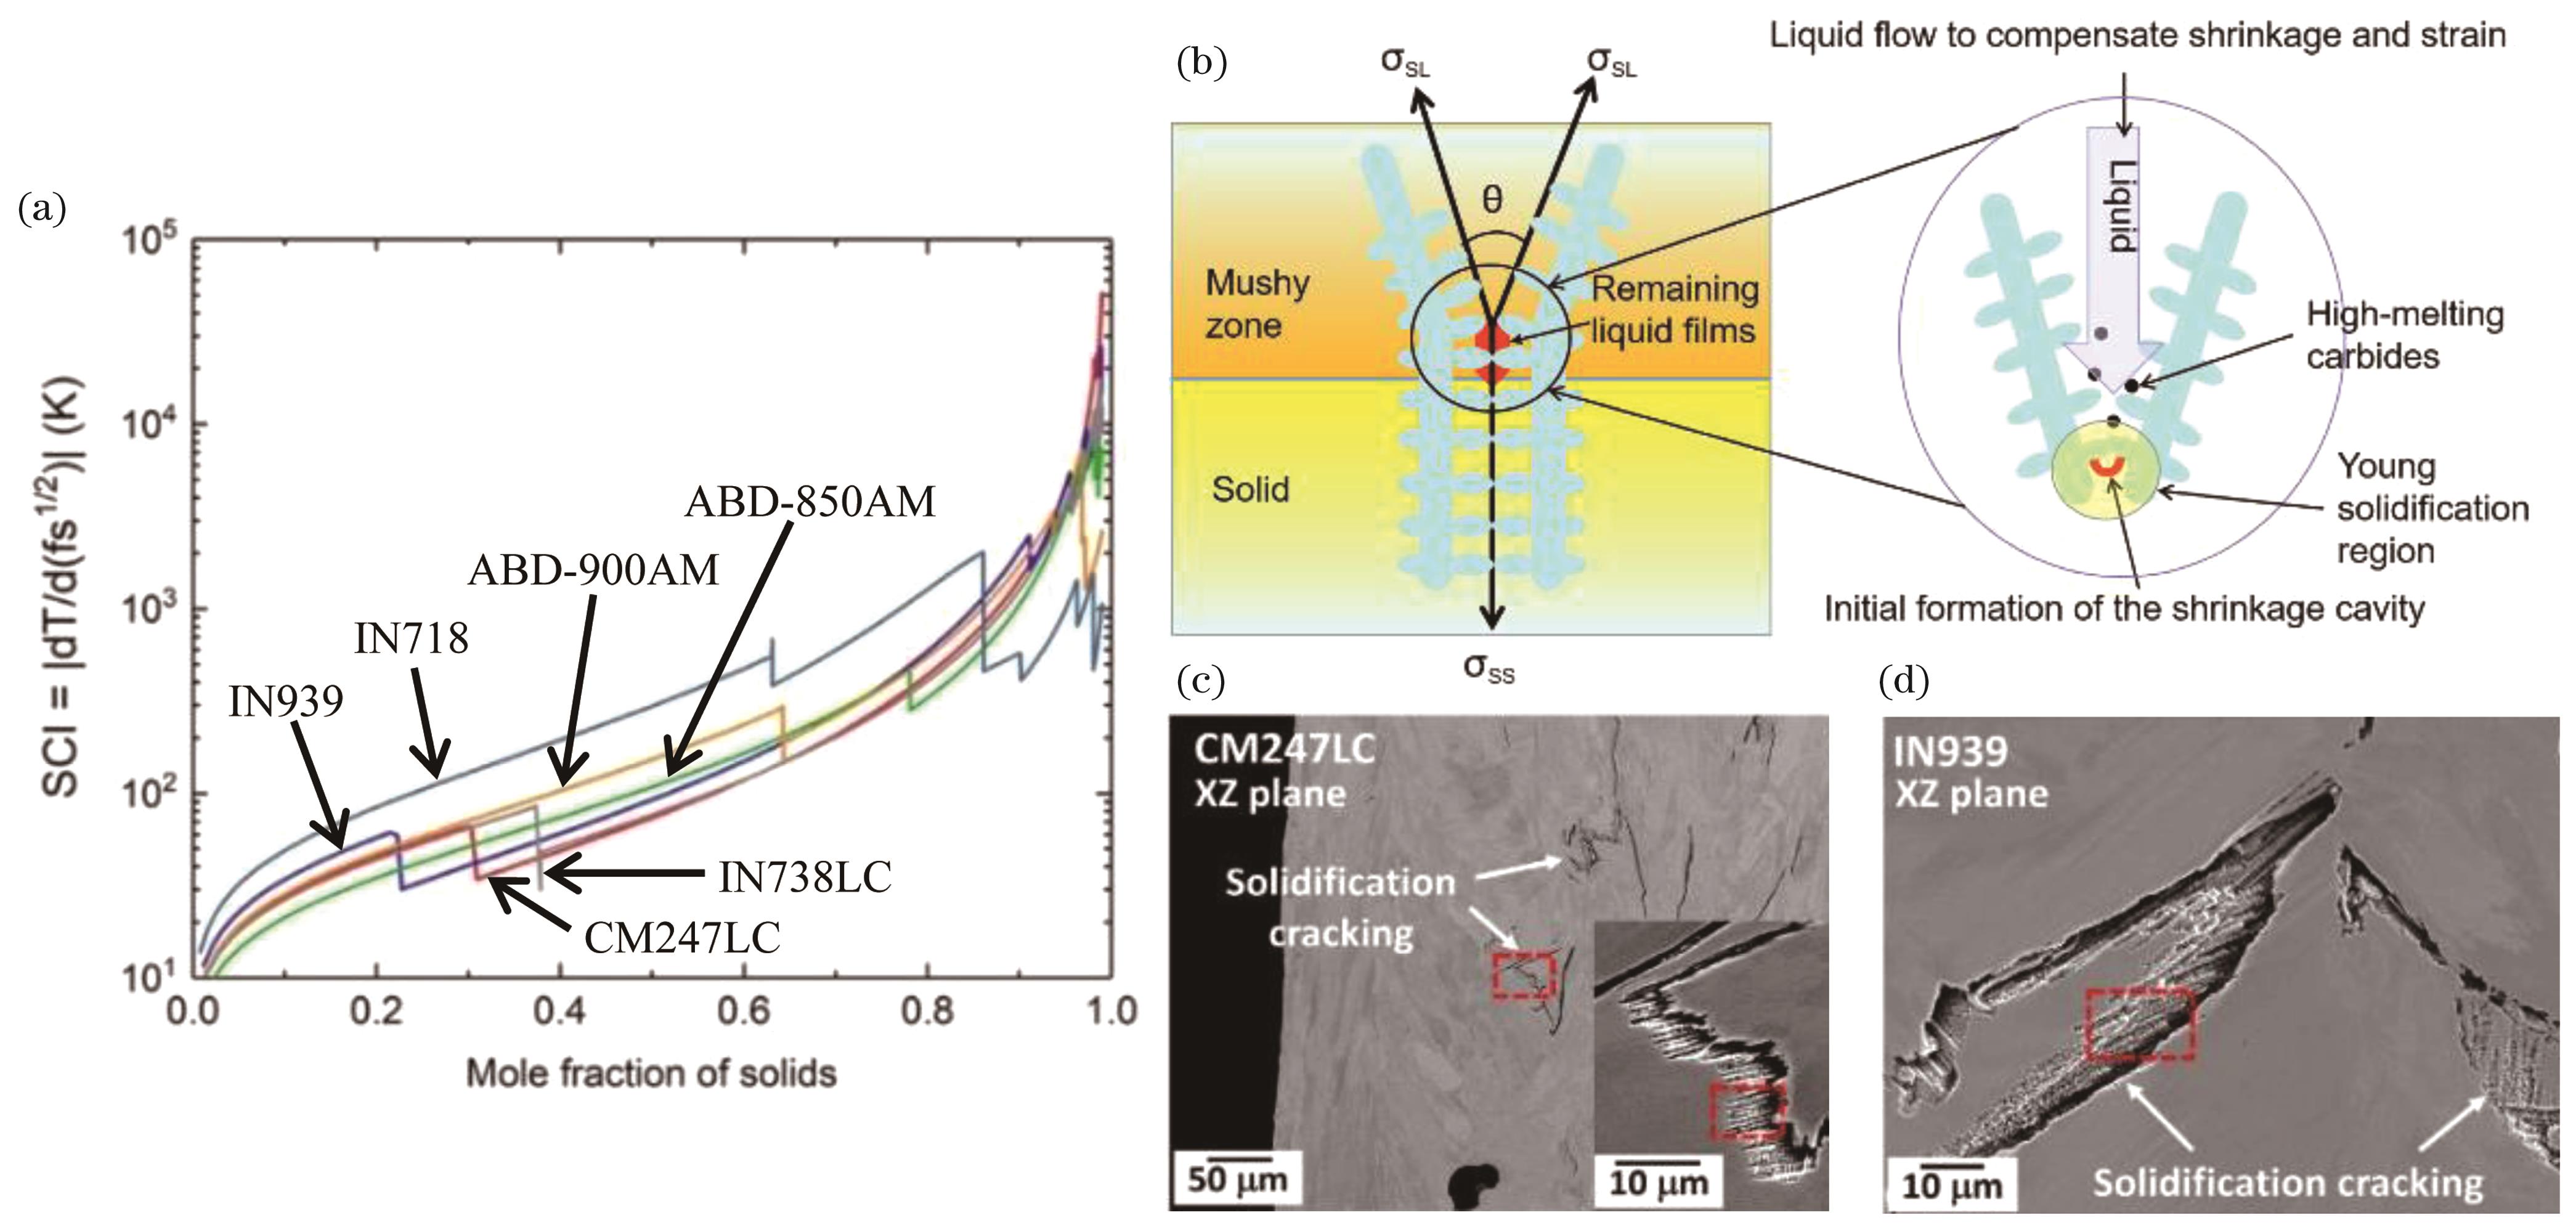 Morphology and cracking mechanism of solidification crack in LAM nickel-based superalloys. (a) Correlation between solid phase fraction and solidification cracking index (SCI)[24]; (b) schematic diagram of cracking mechanism[25]; (c) solidification crack in CM247LC alloy[24]; (d) solidification crack in IN939 alloy[24]